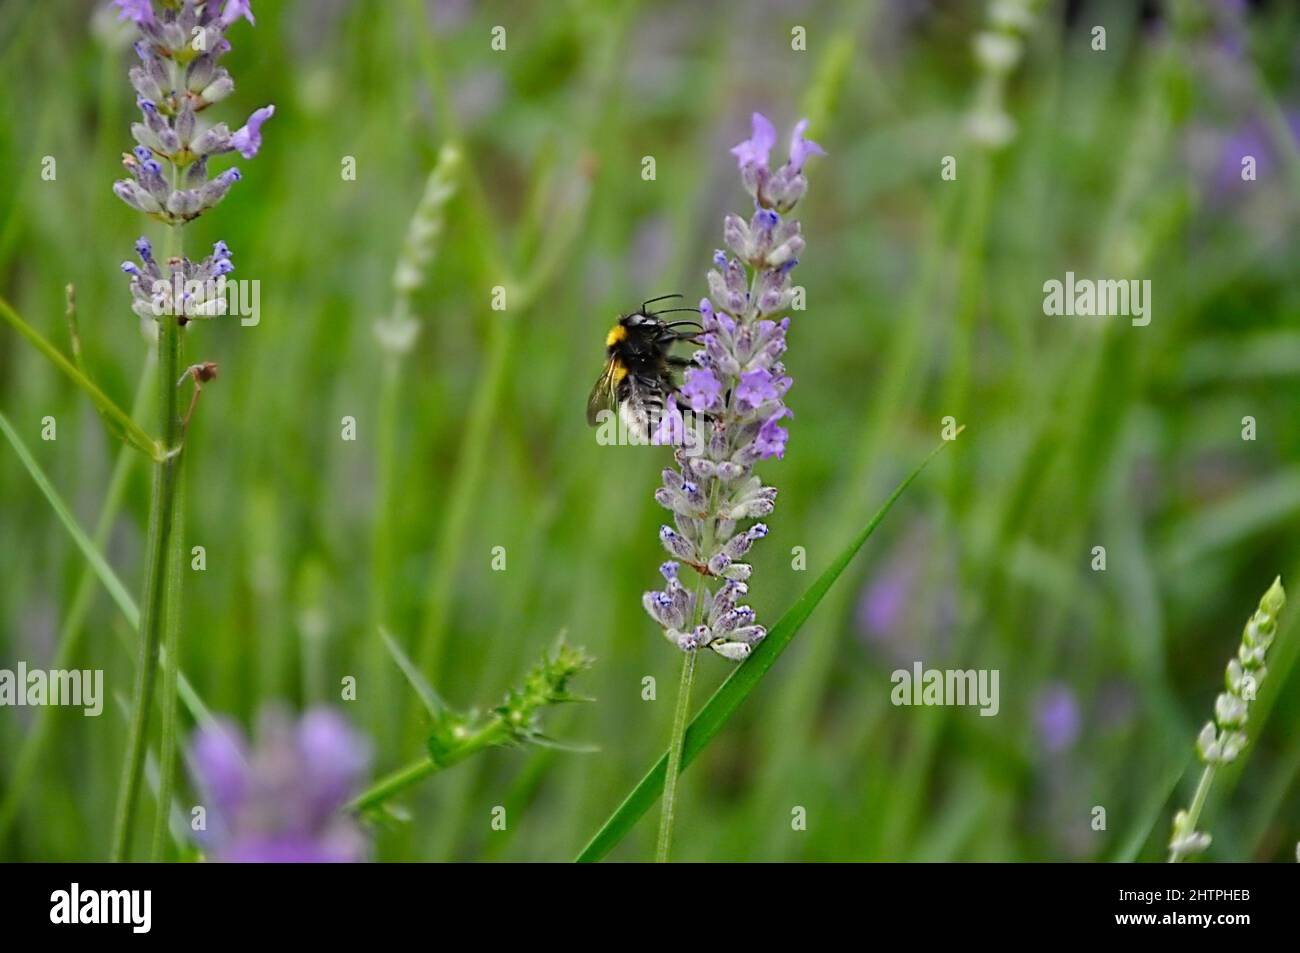 Macro admission close up view insect bumblebee purple lavender. Bumblebee on a purple and green flower with blurred background. Stock Photo